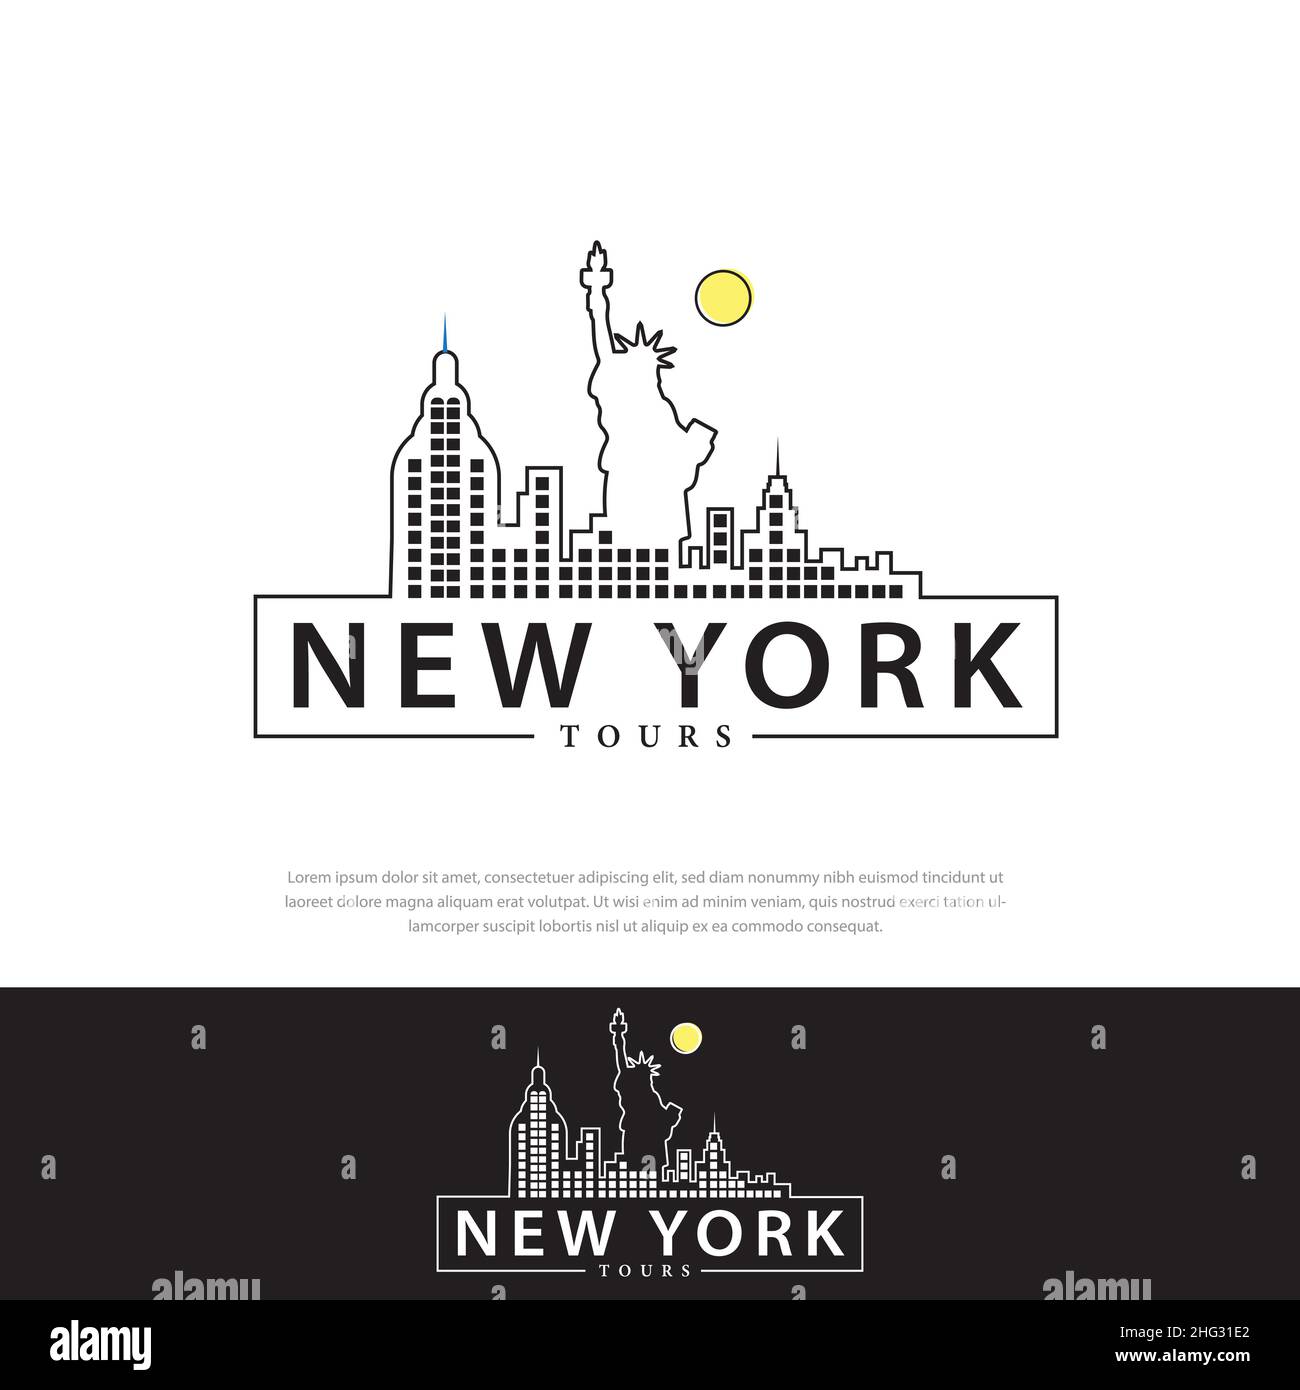 Logo design Graphic illustration of New York City with various famous buildings and points of interest. Modern vector line art design. Stock Vector